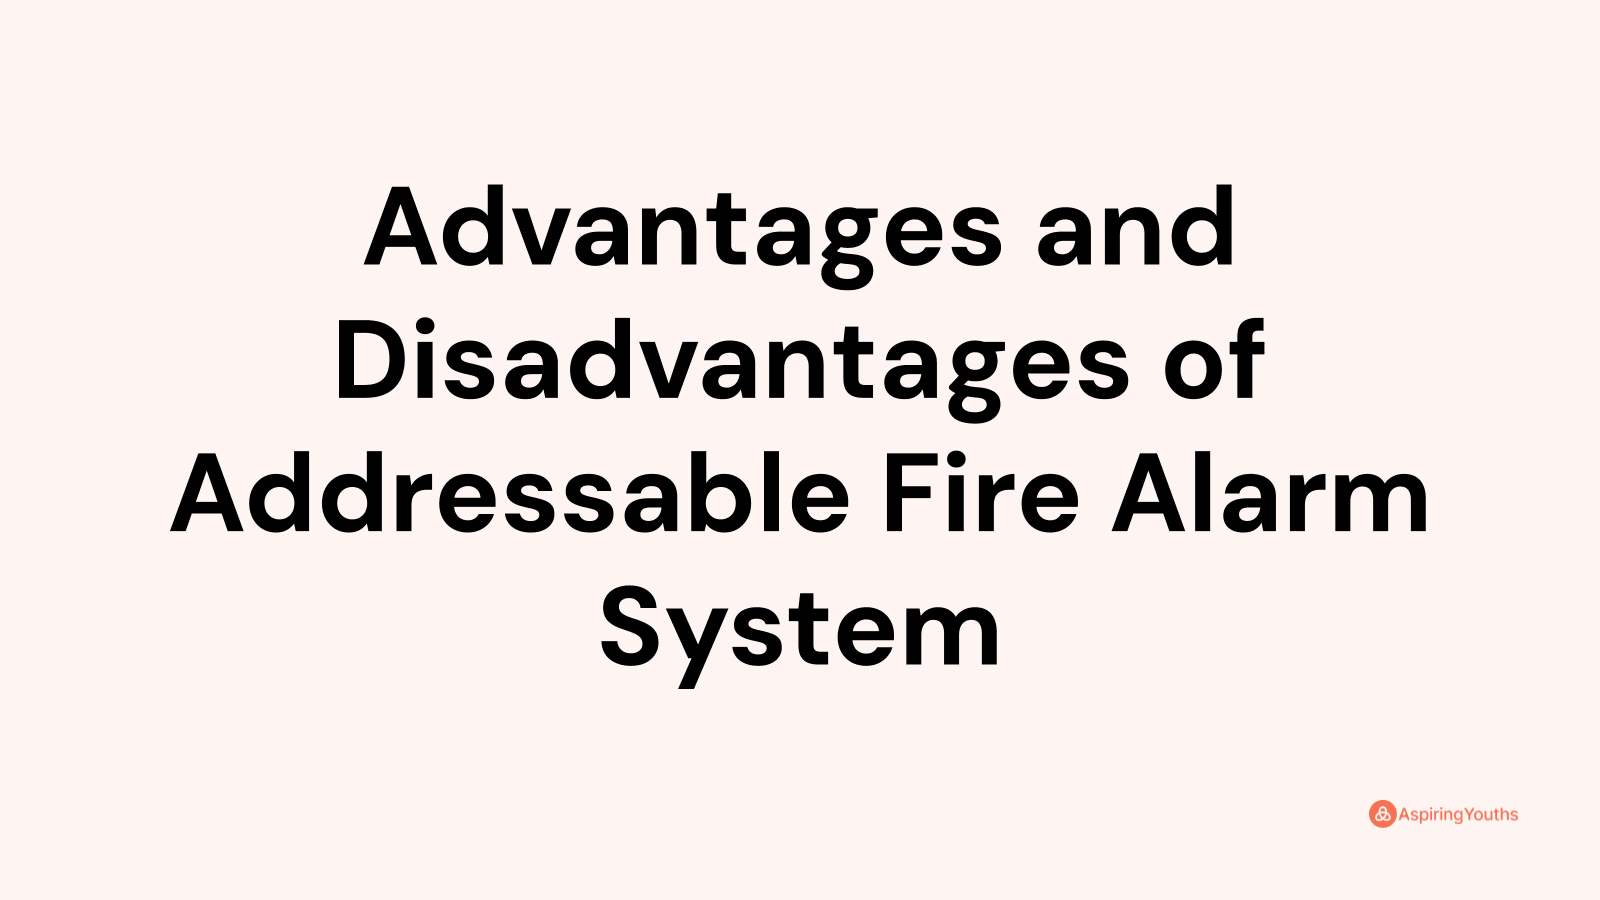 Advantages and disadvantages of Addressable Fire Alarm System